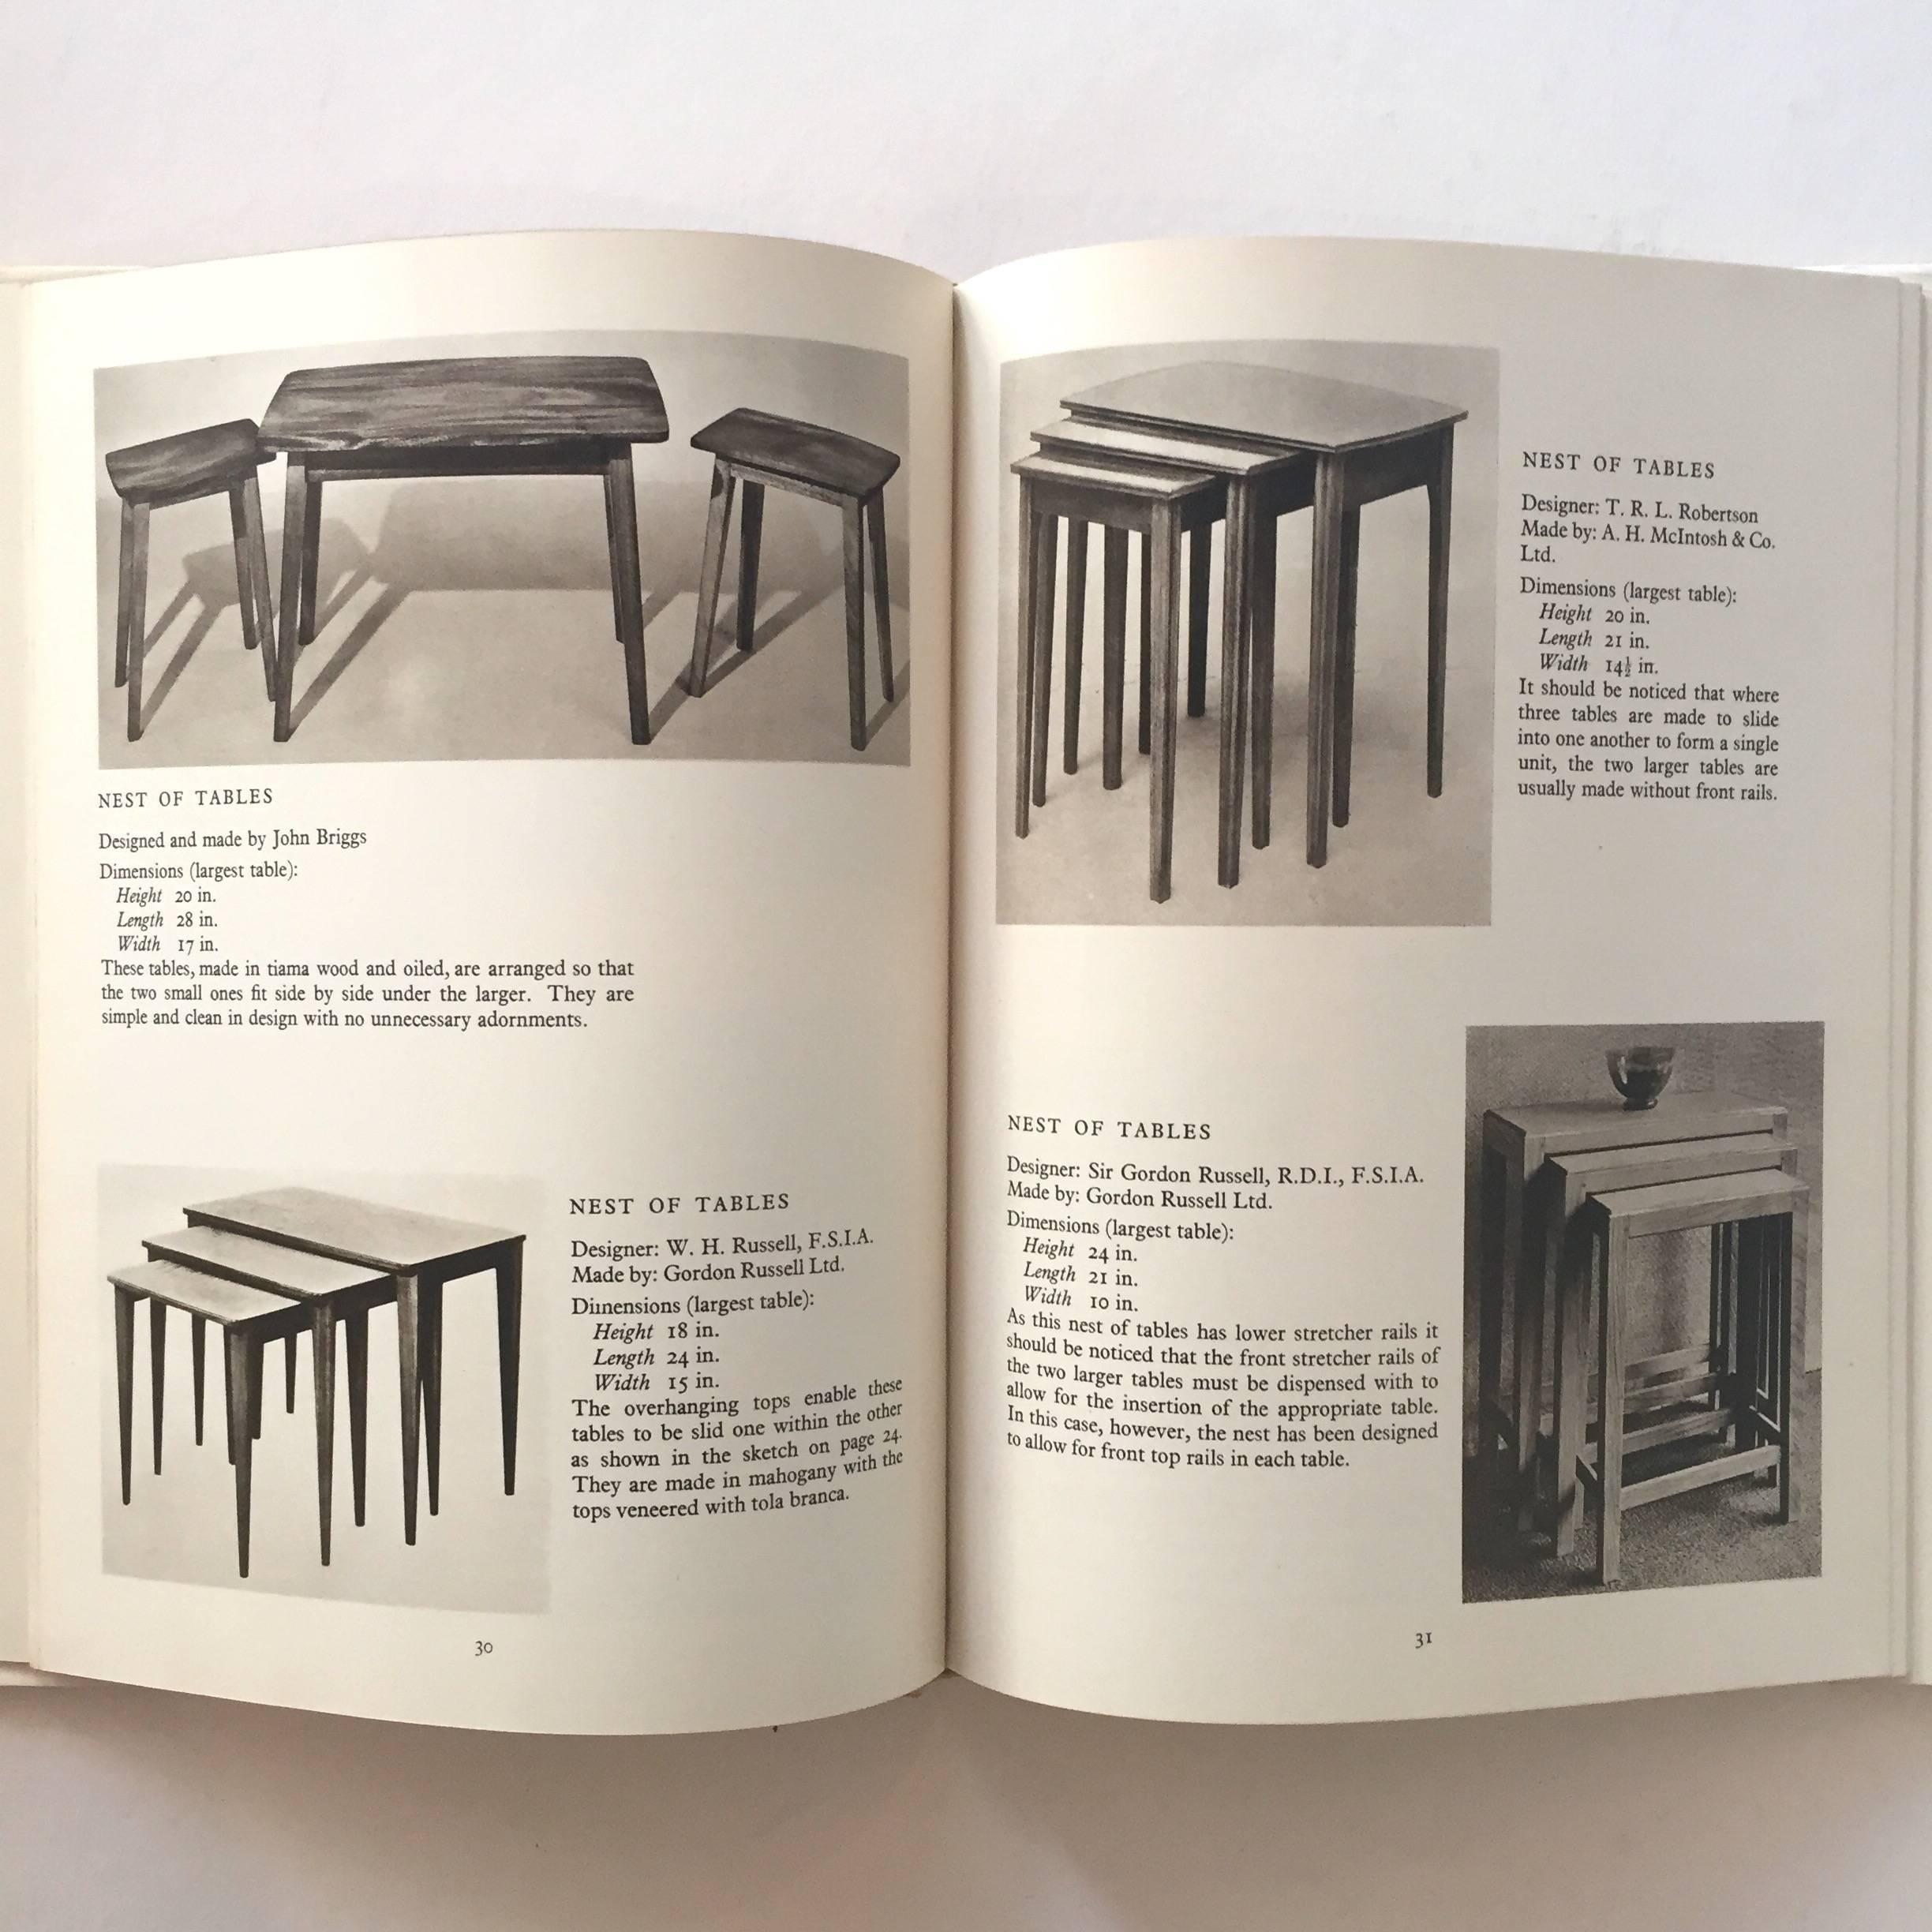 First edition, published by John Murray, 1955

A wonderful collection of contemporary design reproductions, including photographic illustrations of furniture taking influence from the Scandinavia region as well as America and Europe. This book